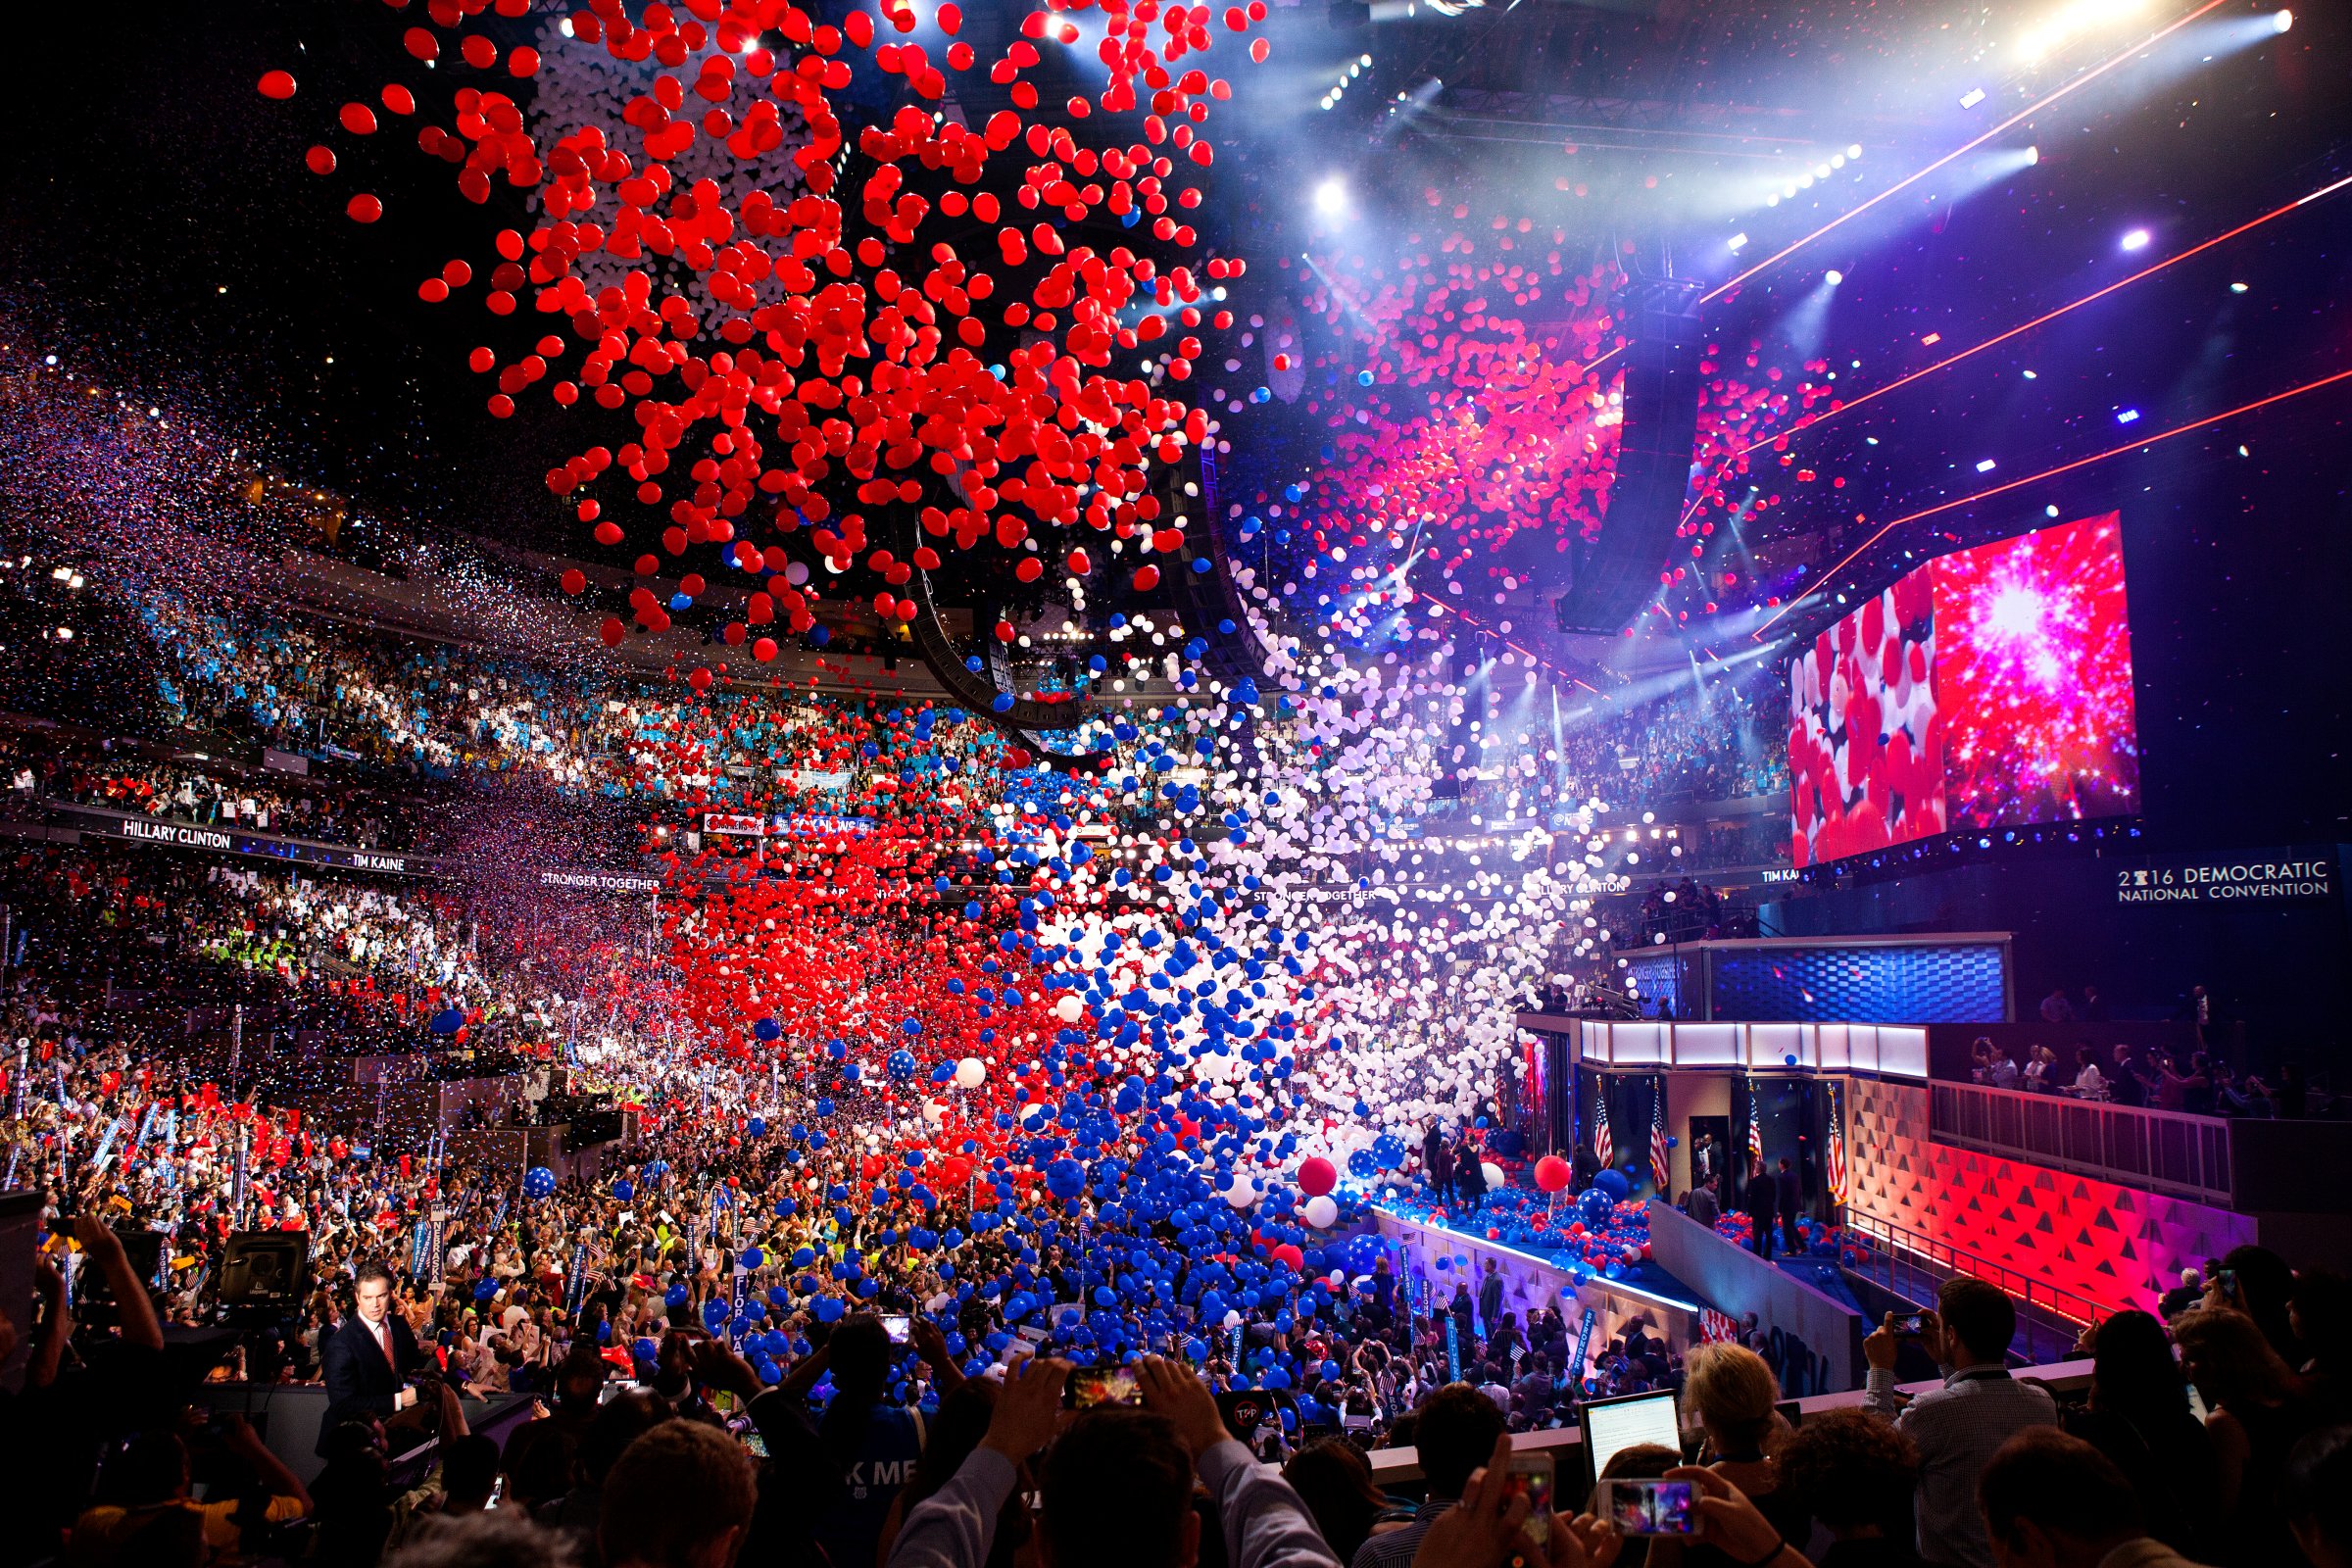 Balloons drop at the conclusion of the Democratic National Convention in Philadelphia on July 28, 2016.